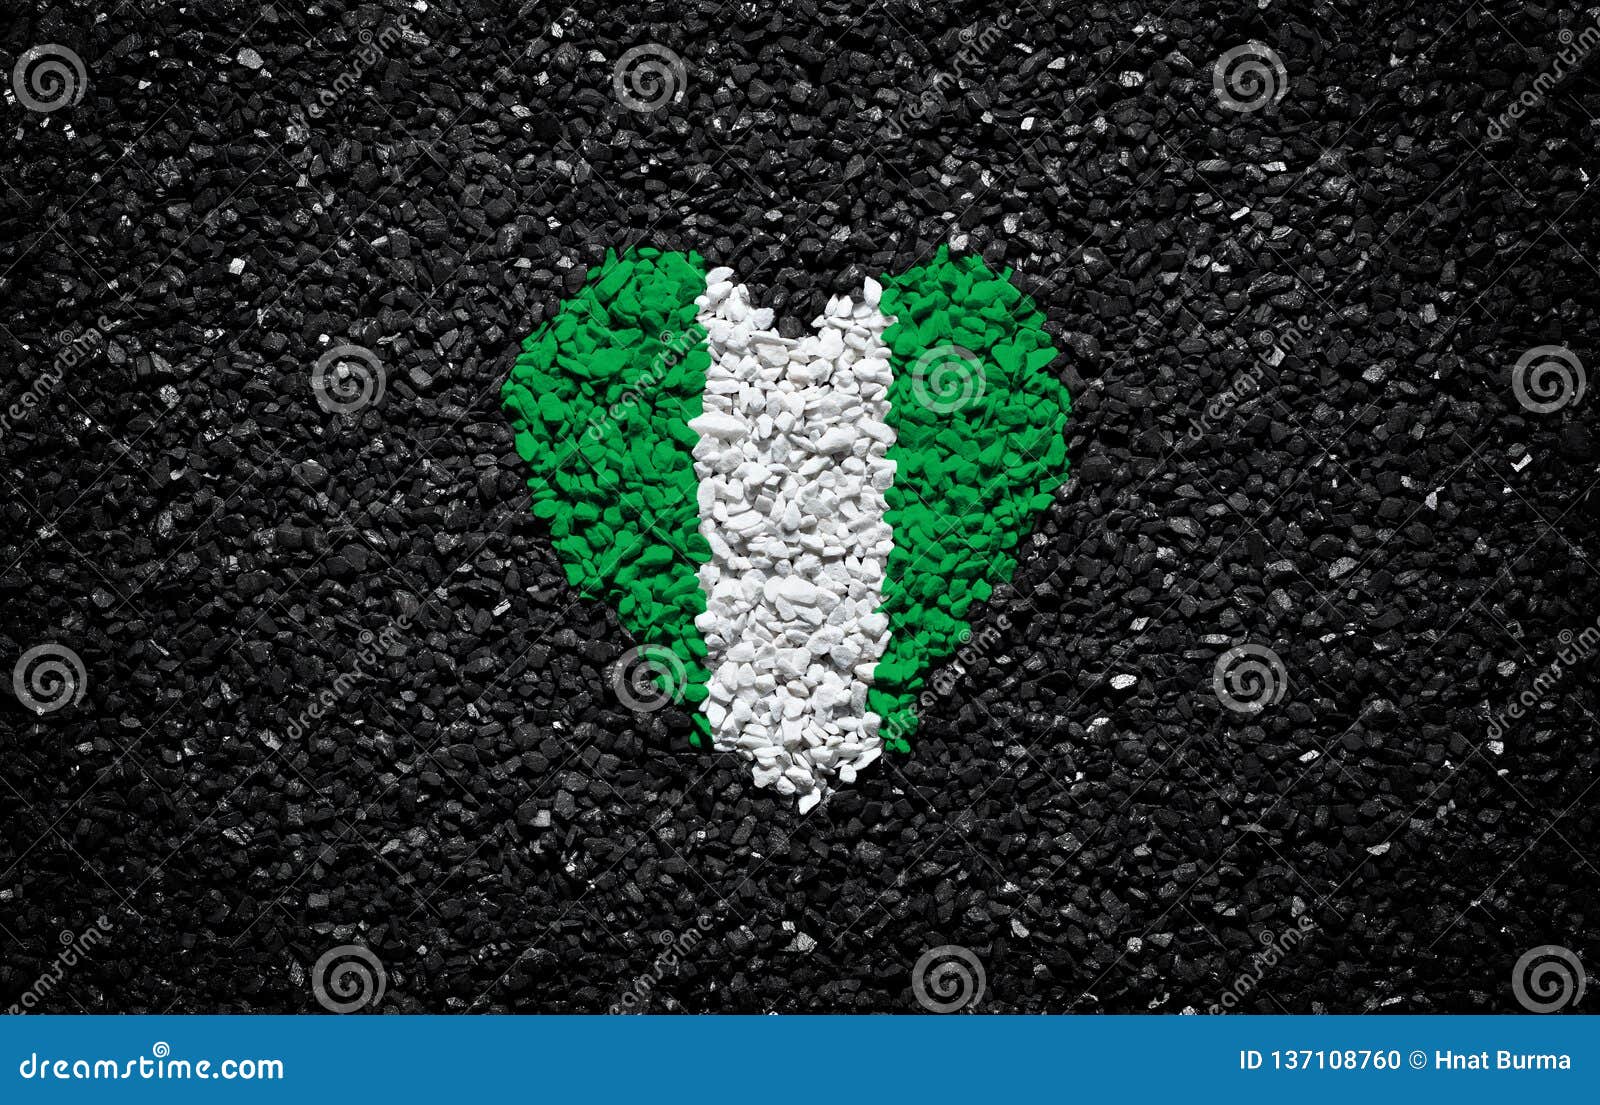 Nigeria Background Images HD Pictures and Wallpaper For Free Download   Pngtree